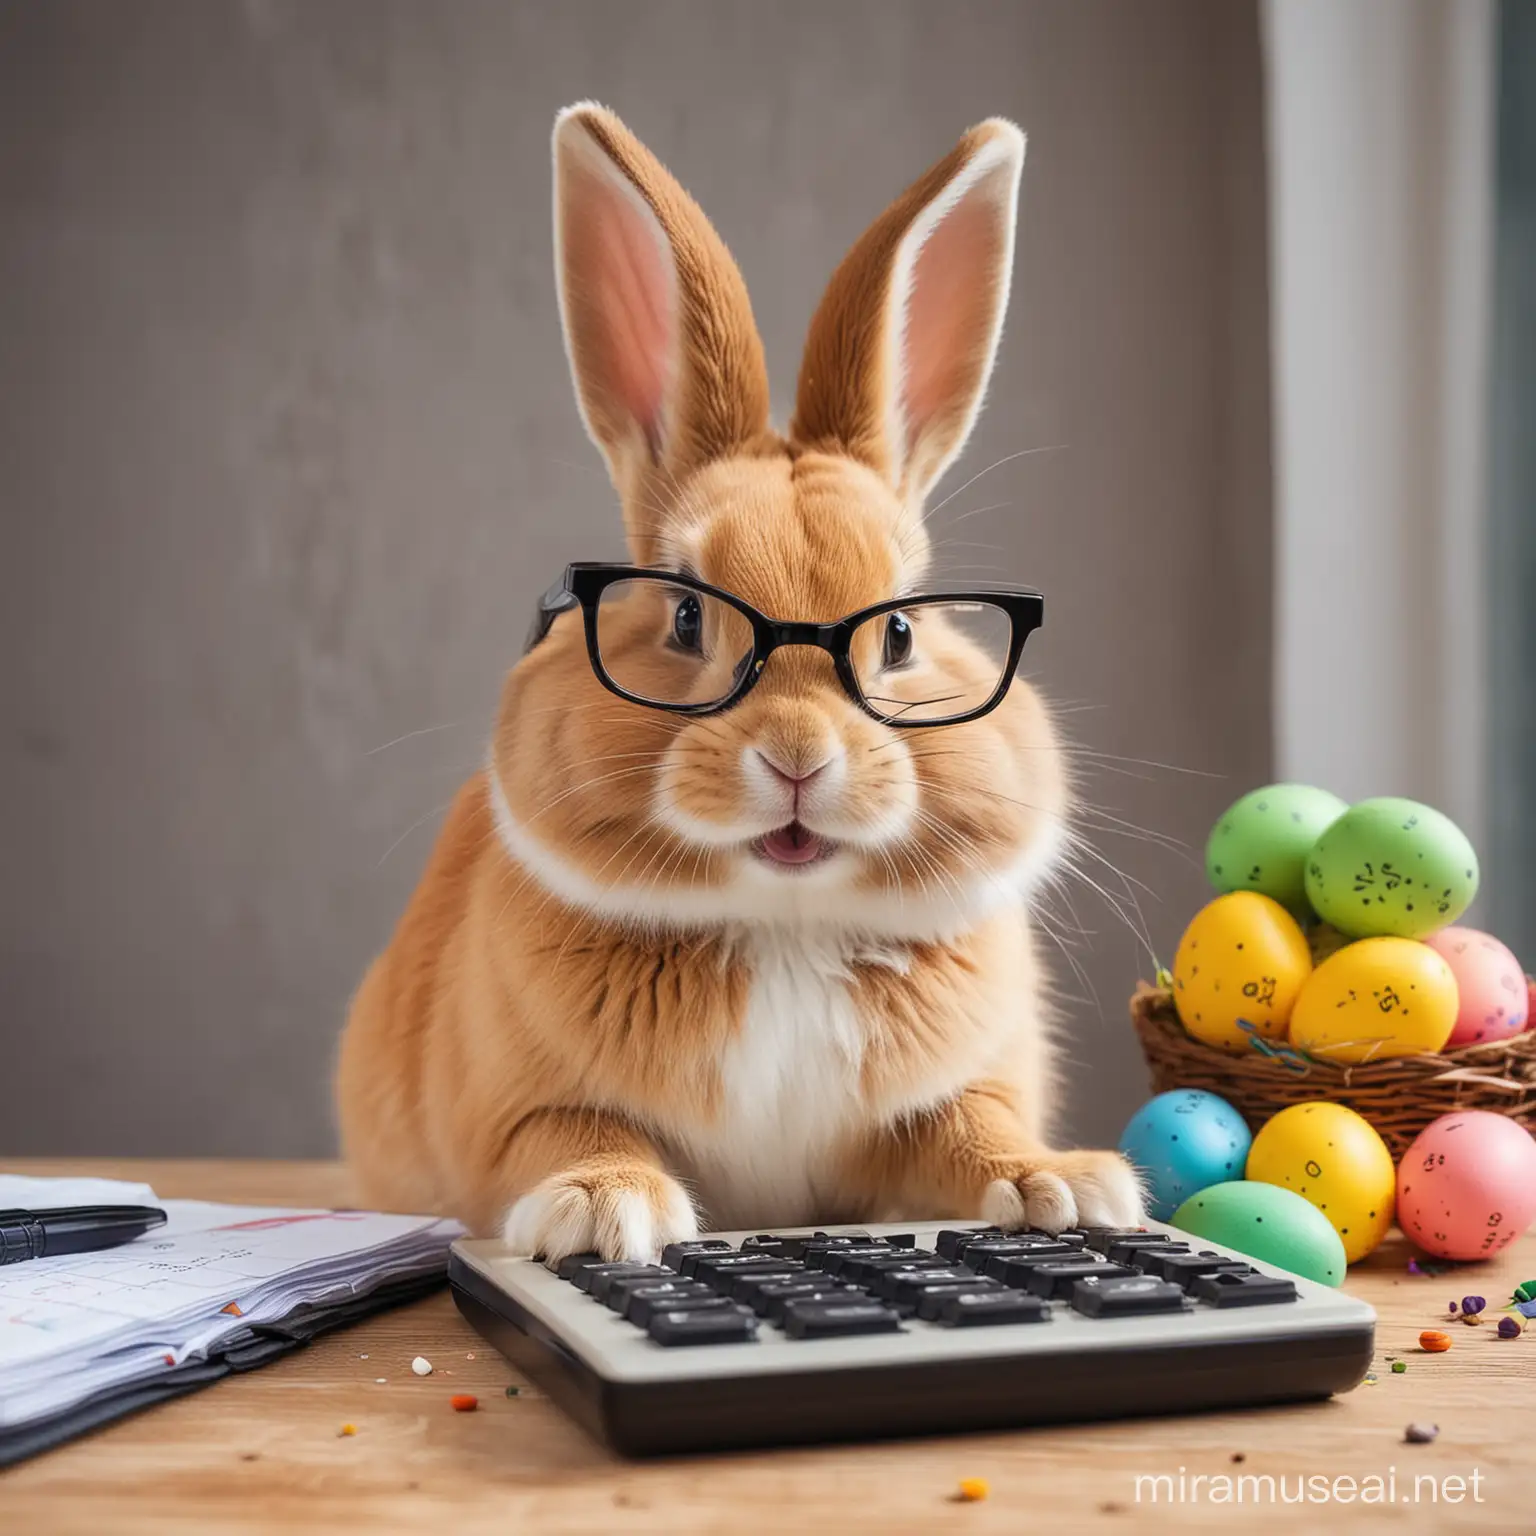 Joyful Rabbit Using Calculator with Glasses Surrounded by Colorful Easter Visuals